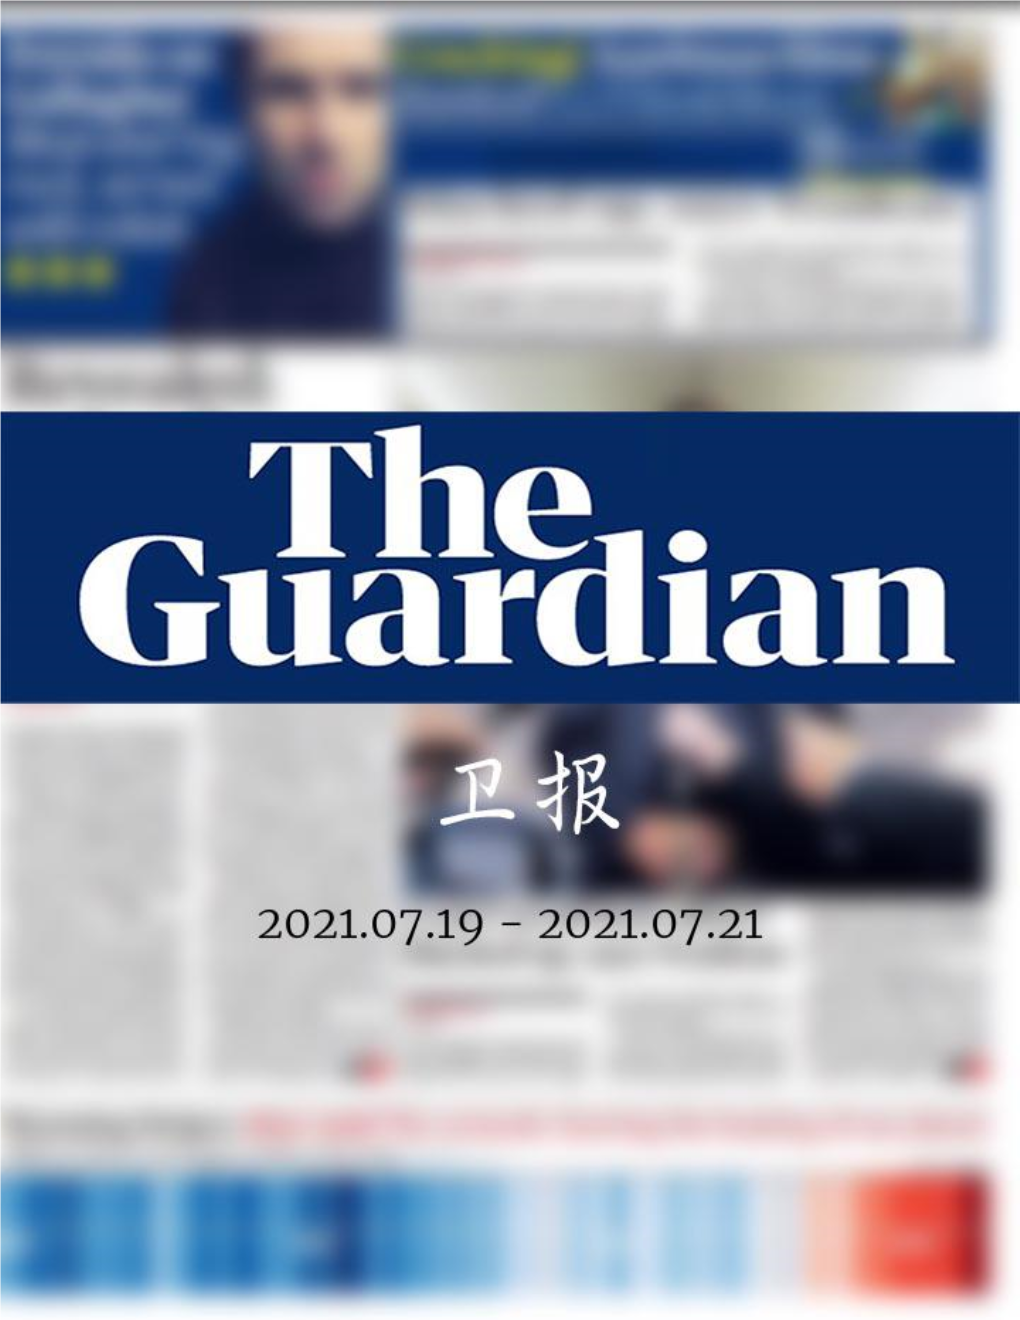 The Guardian.2021.07.21 [Wed, 21 Jul 2021]